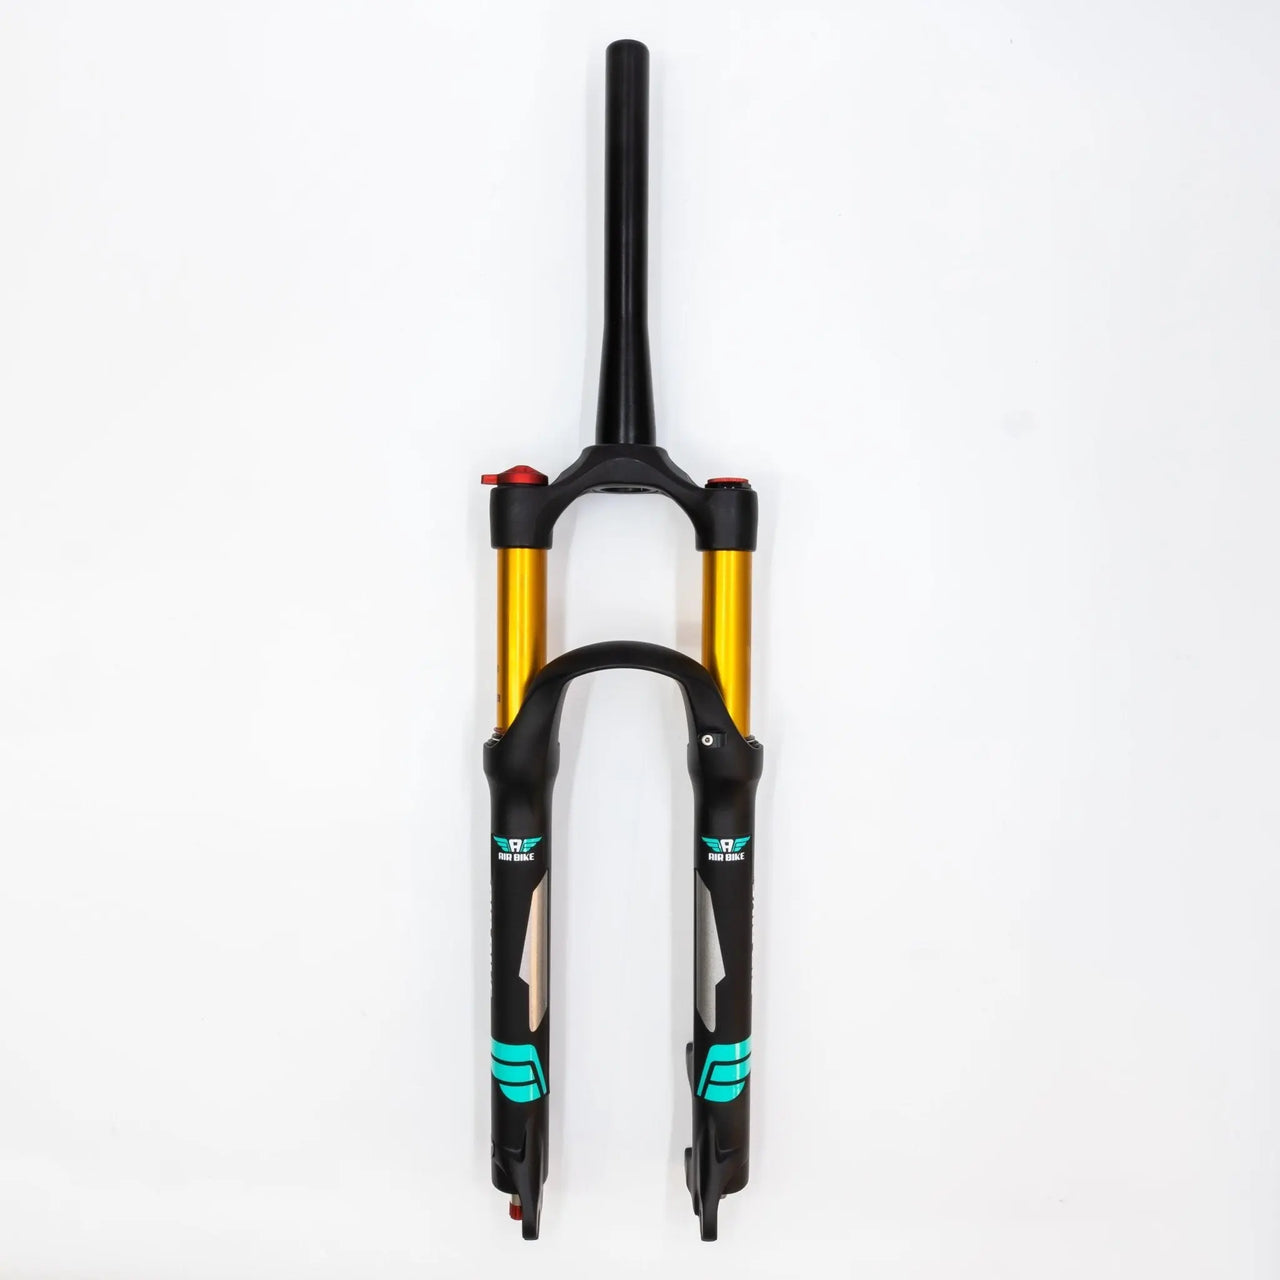 26 Inch Air Fork Tapered XC32A Black 140mm Travel & Rebound Suspension Fork Air Bike - Air BikeSuspension Fork